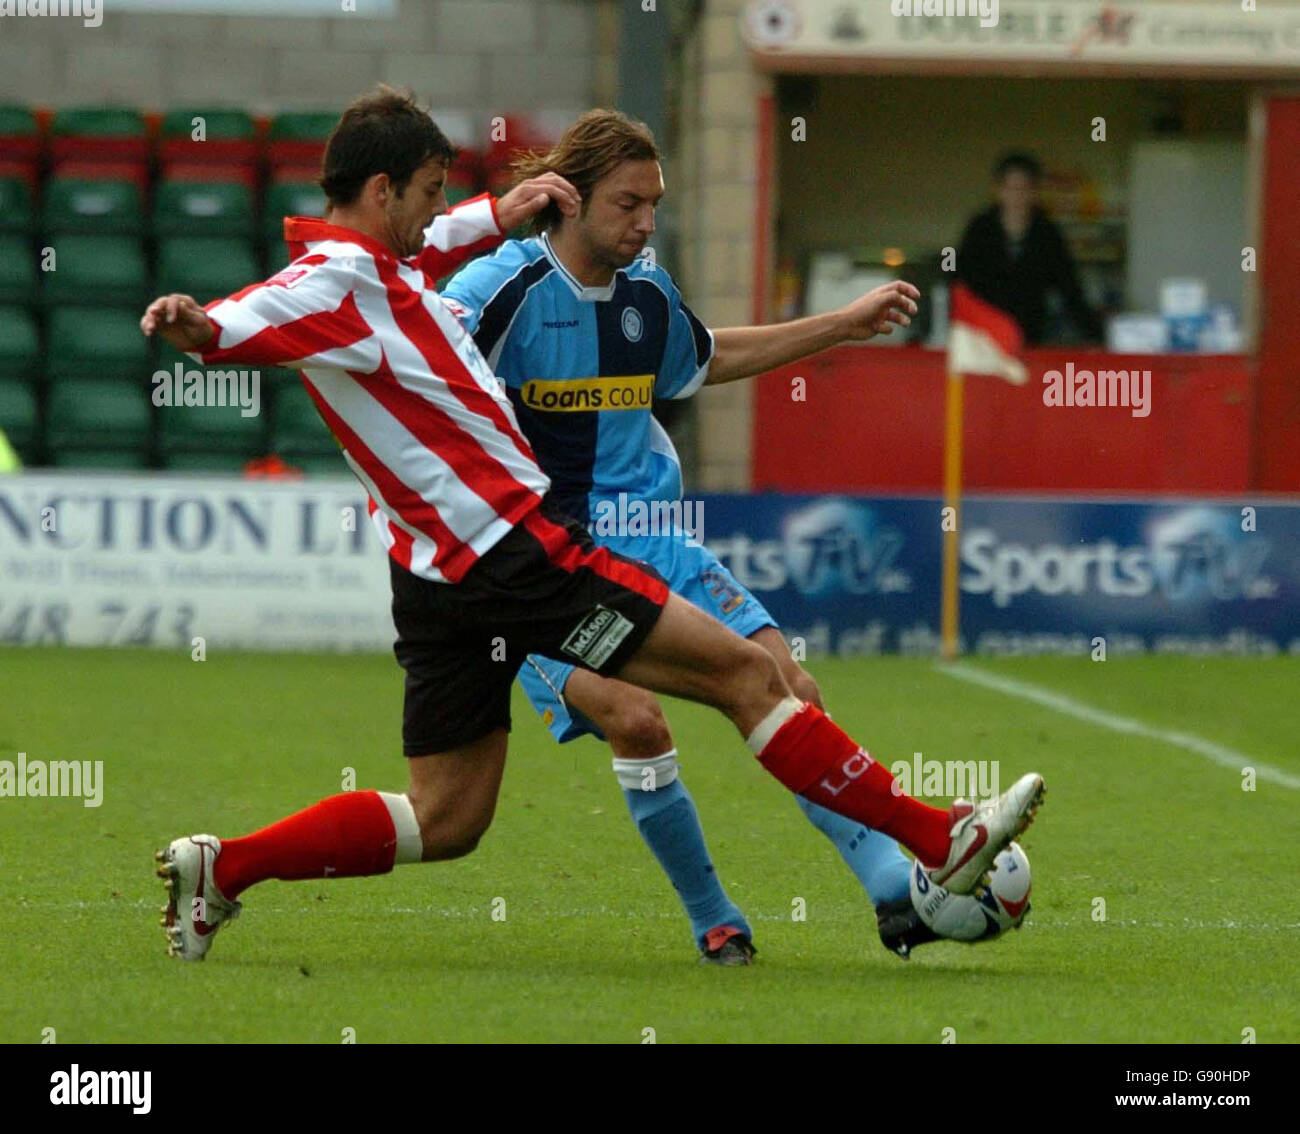 Lincoln's Richard Butcher (L) chases the ball with Wycombe's Clint Easton during the Coca Cola League Two match at Sincil Bank Stadium, Lincoln, Saturday October 22, 2005. PRESS ASSOCIATION Photo. Photo credit should read: John Jones/PA. NO UNOFFICIAL CLUB WEBSITE USE. Stock Photo